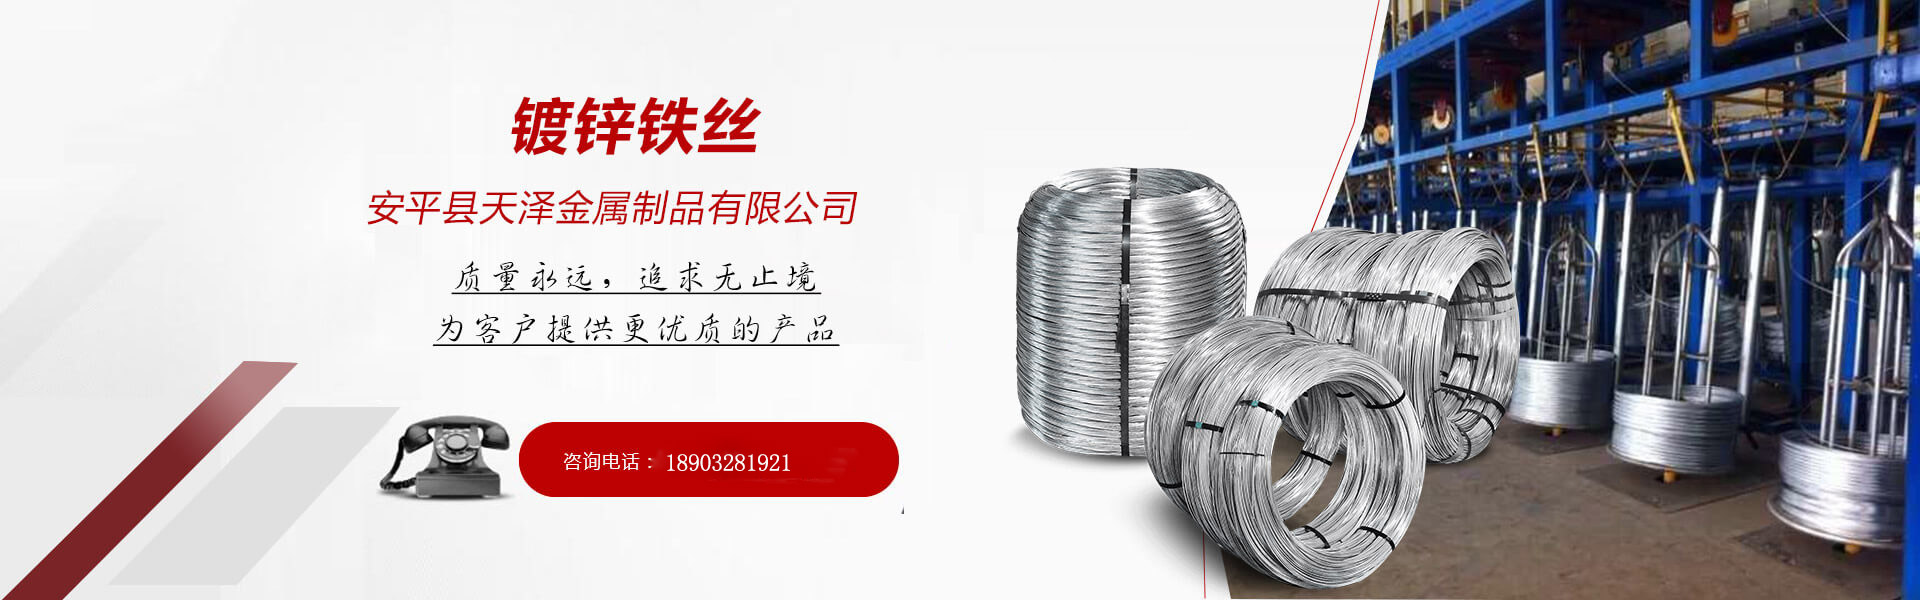 Anping County Tianze Metal Products Co.,Ltd.